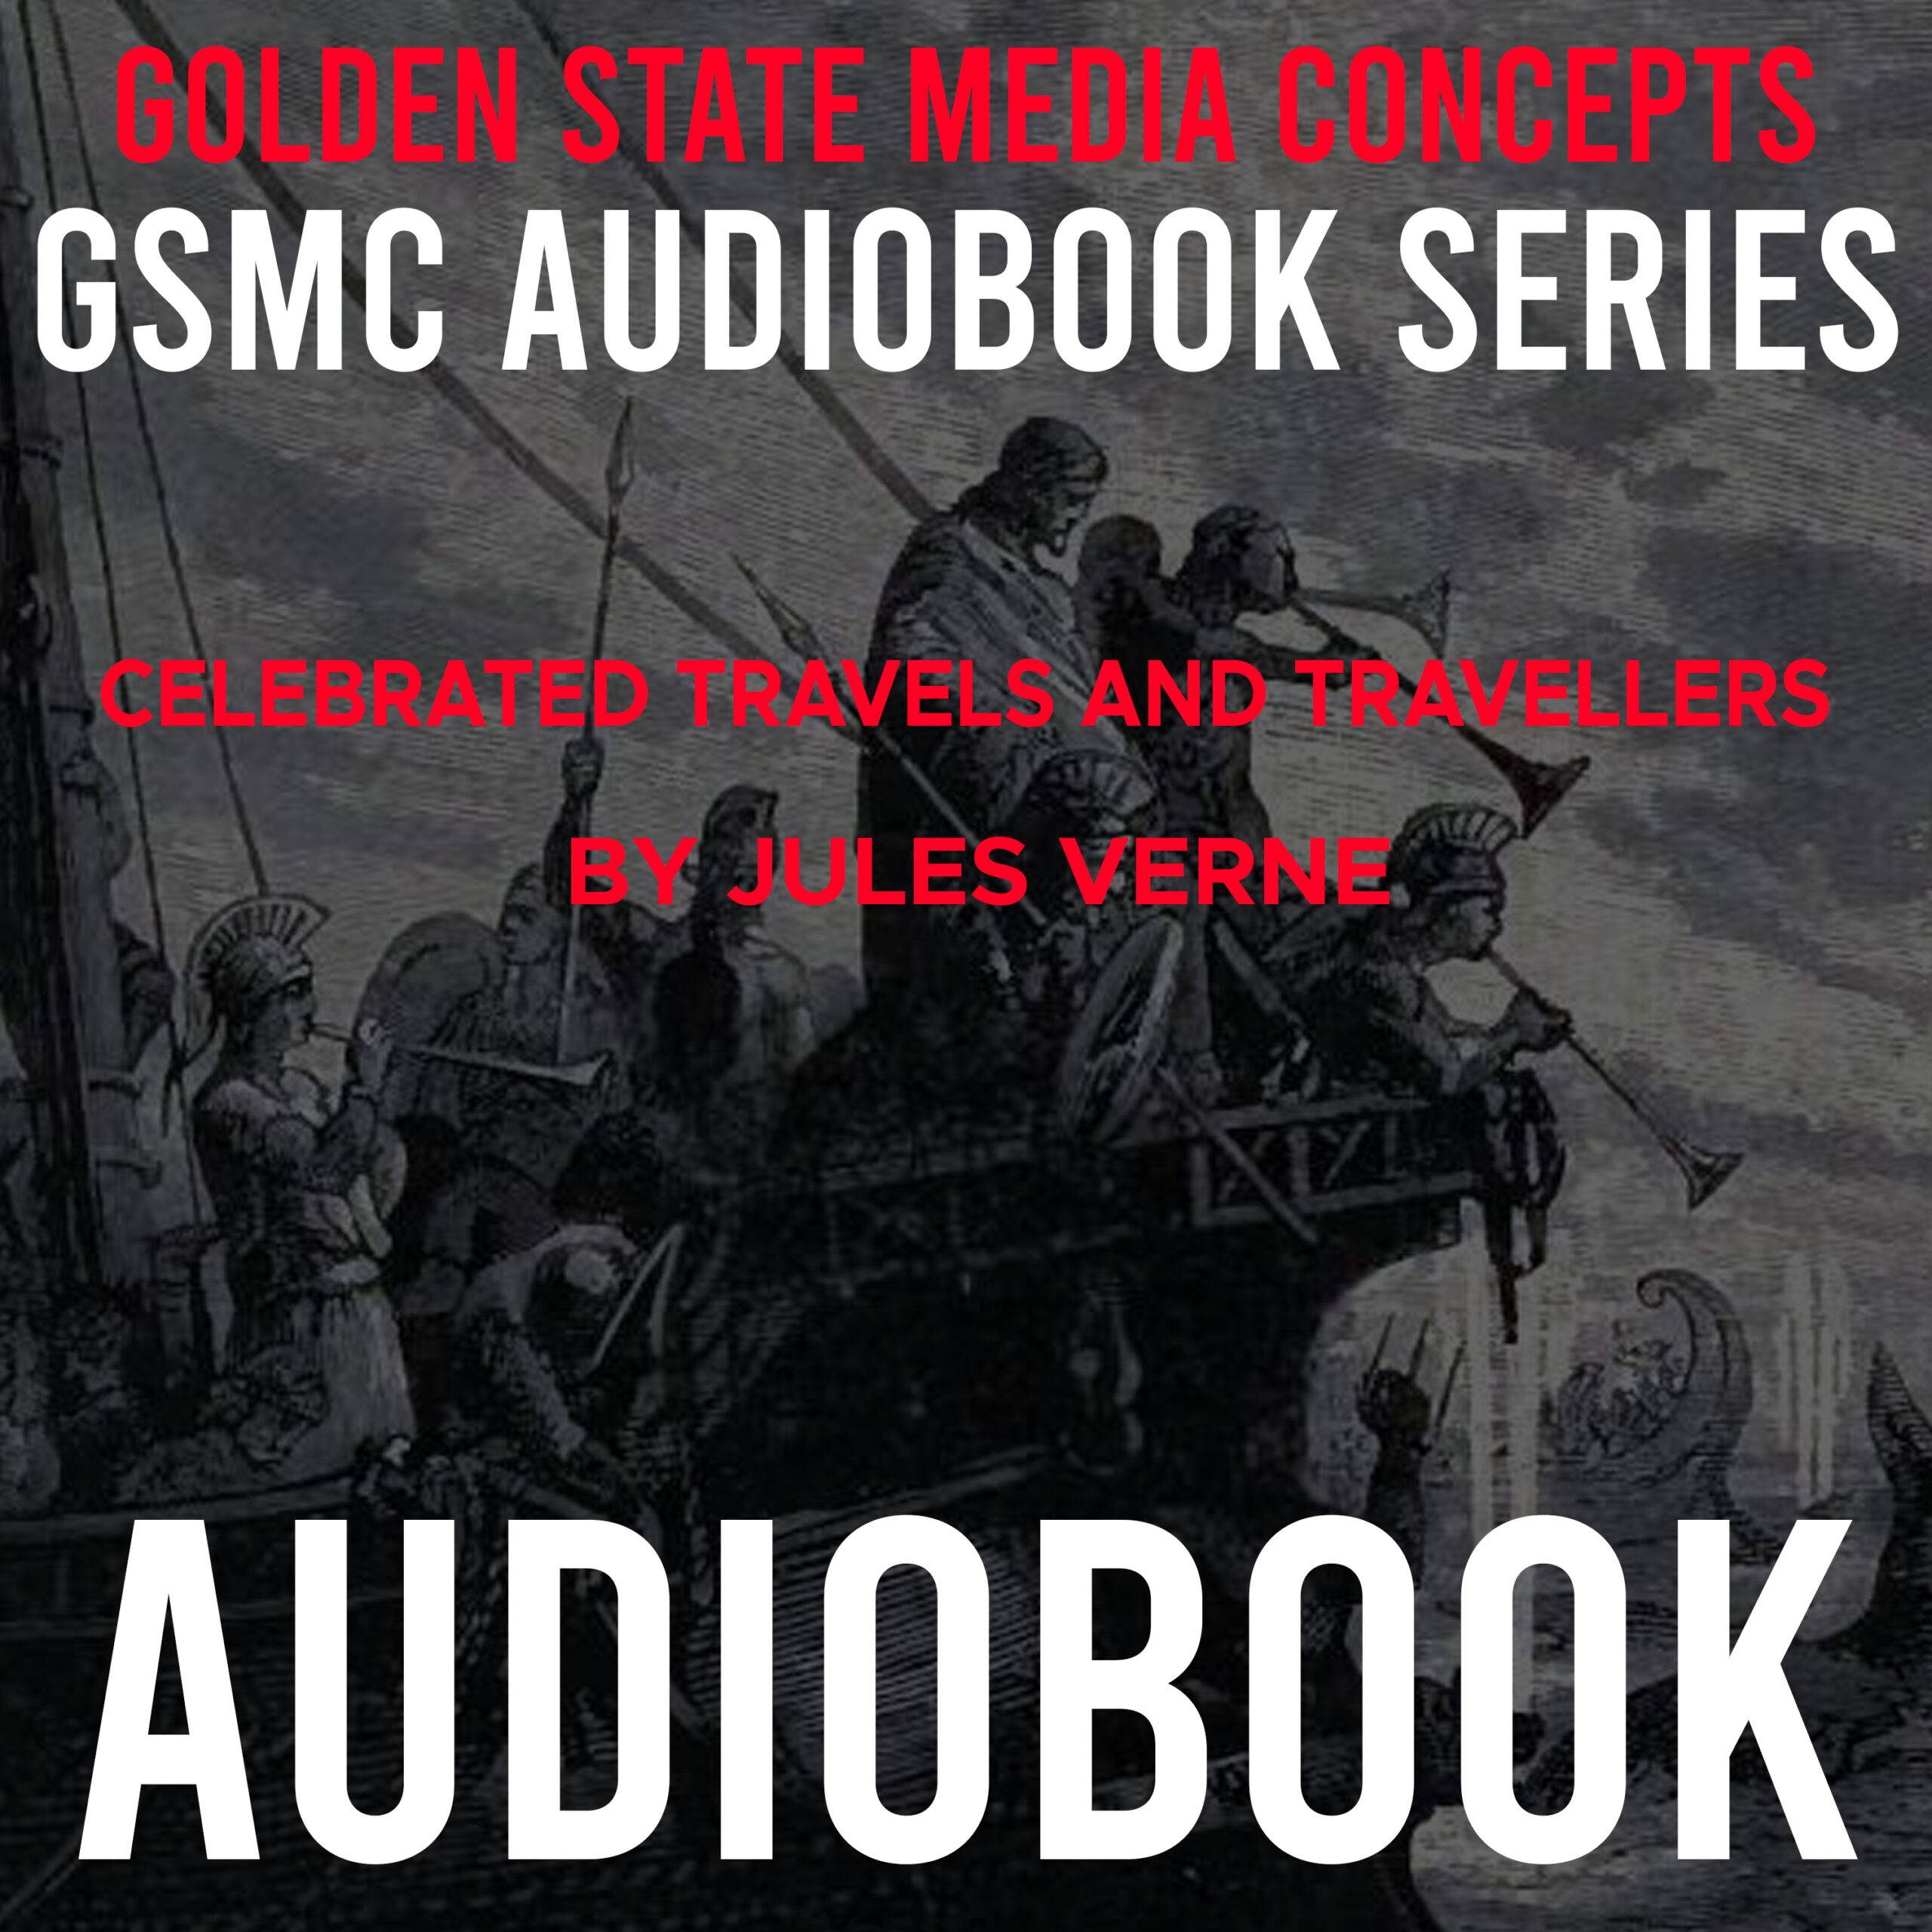 GSMC Audiobook Series: Celebrated Travels and Travellers